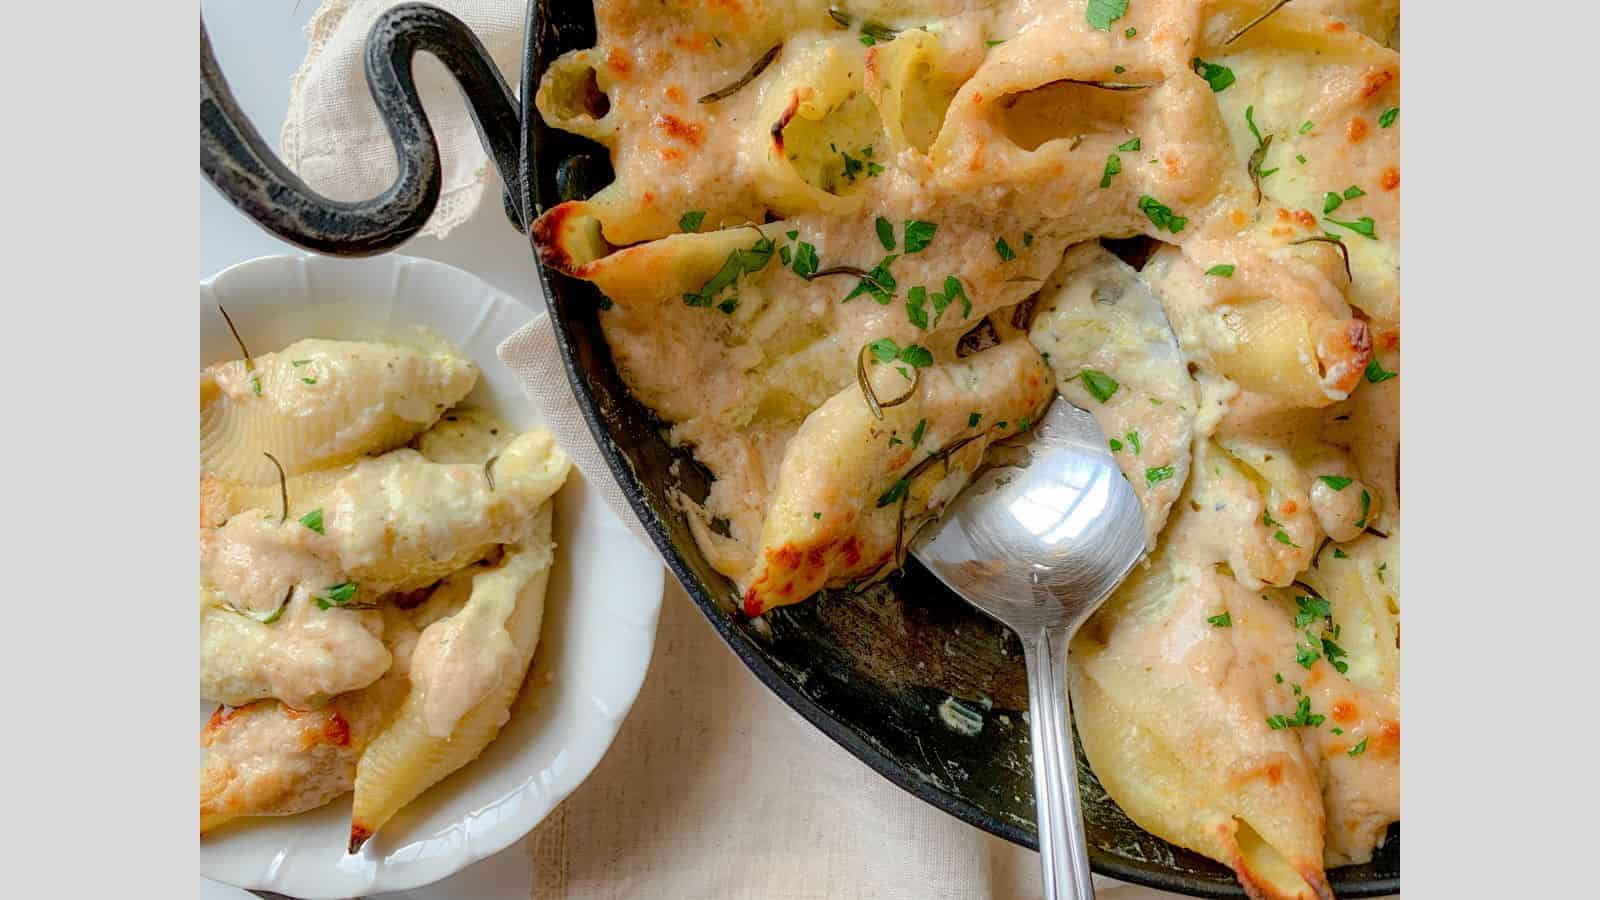 A cast iron pan filled with stuffed shells covered in cheese and a white sauce.